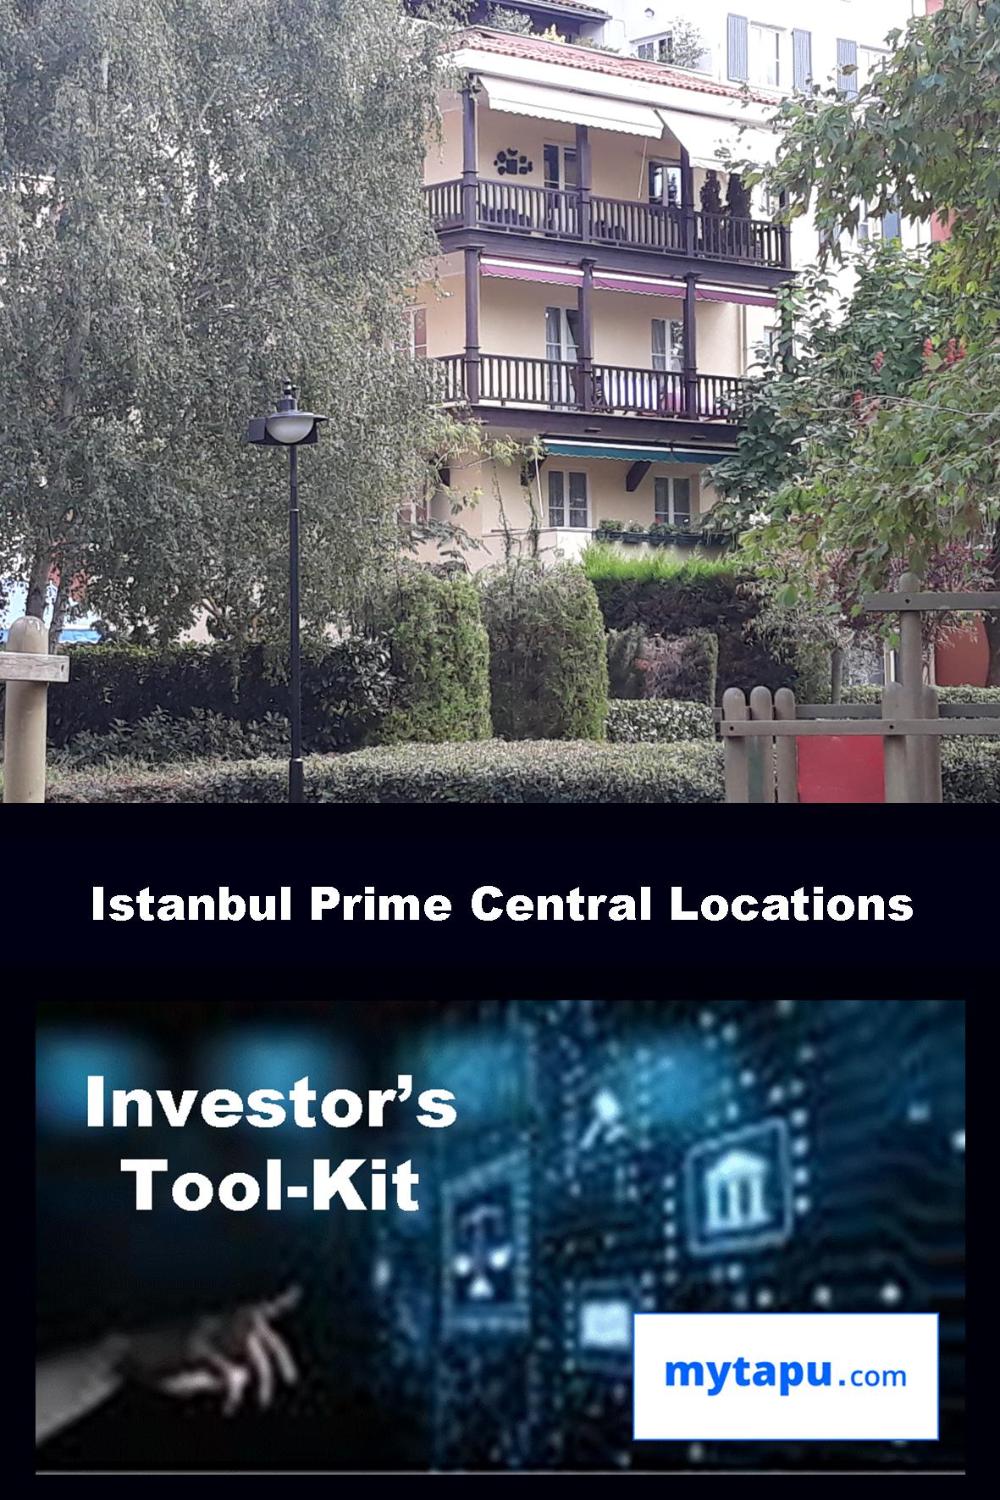 Exclusive Luxury Property for Investment in Prime Central istanbul Locations